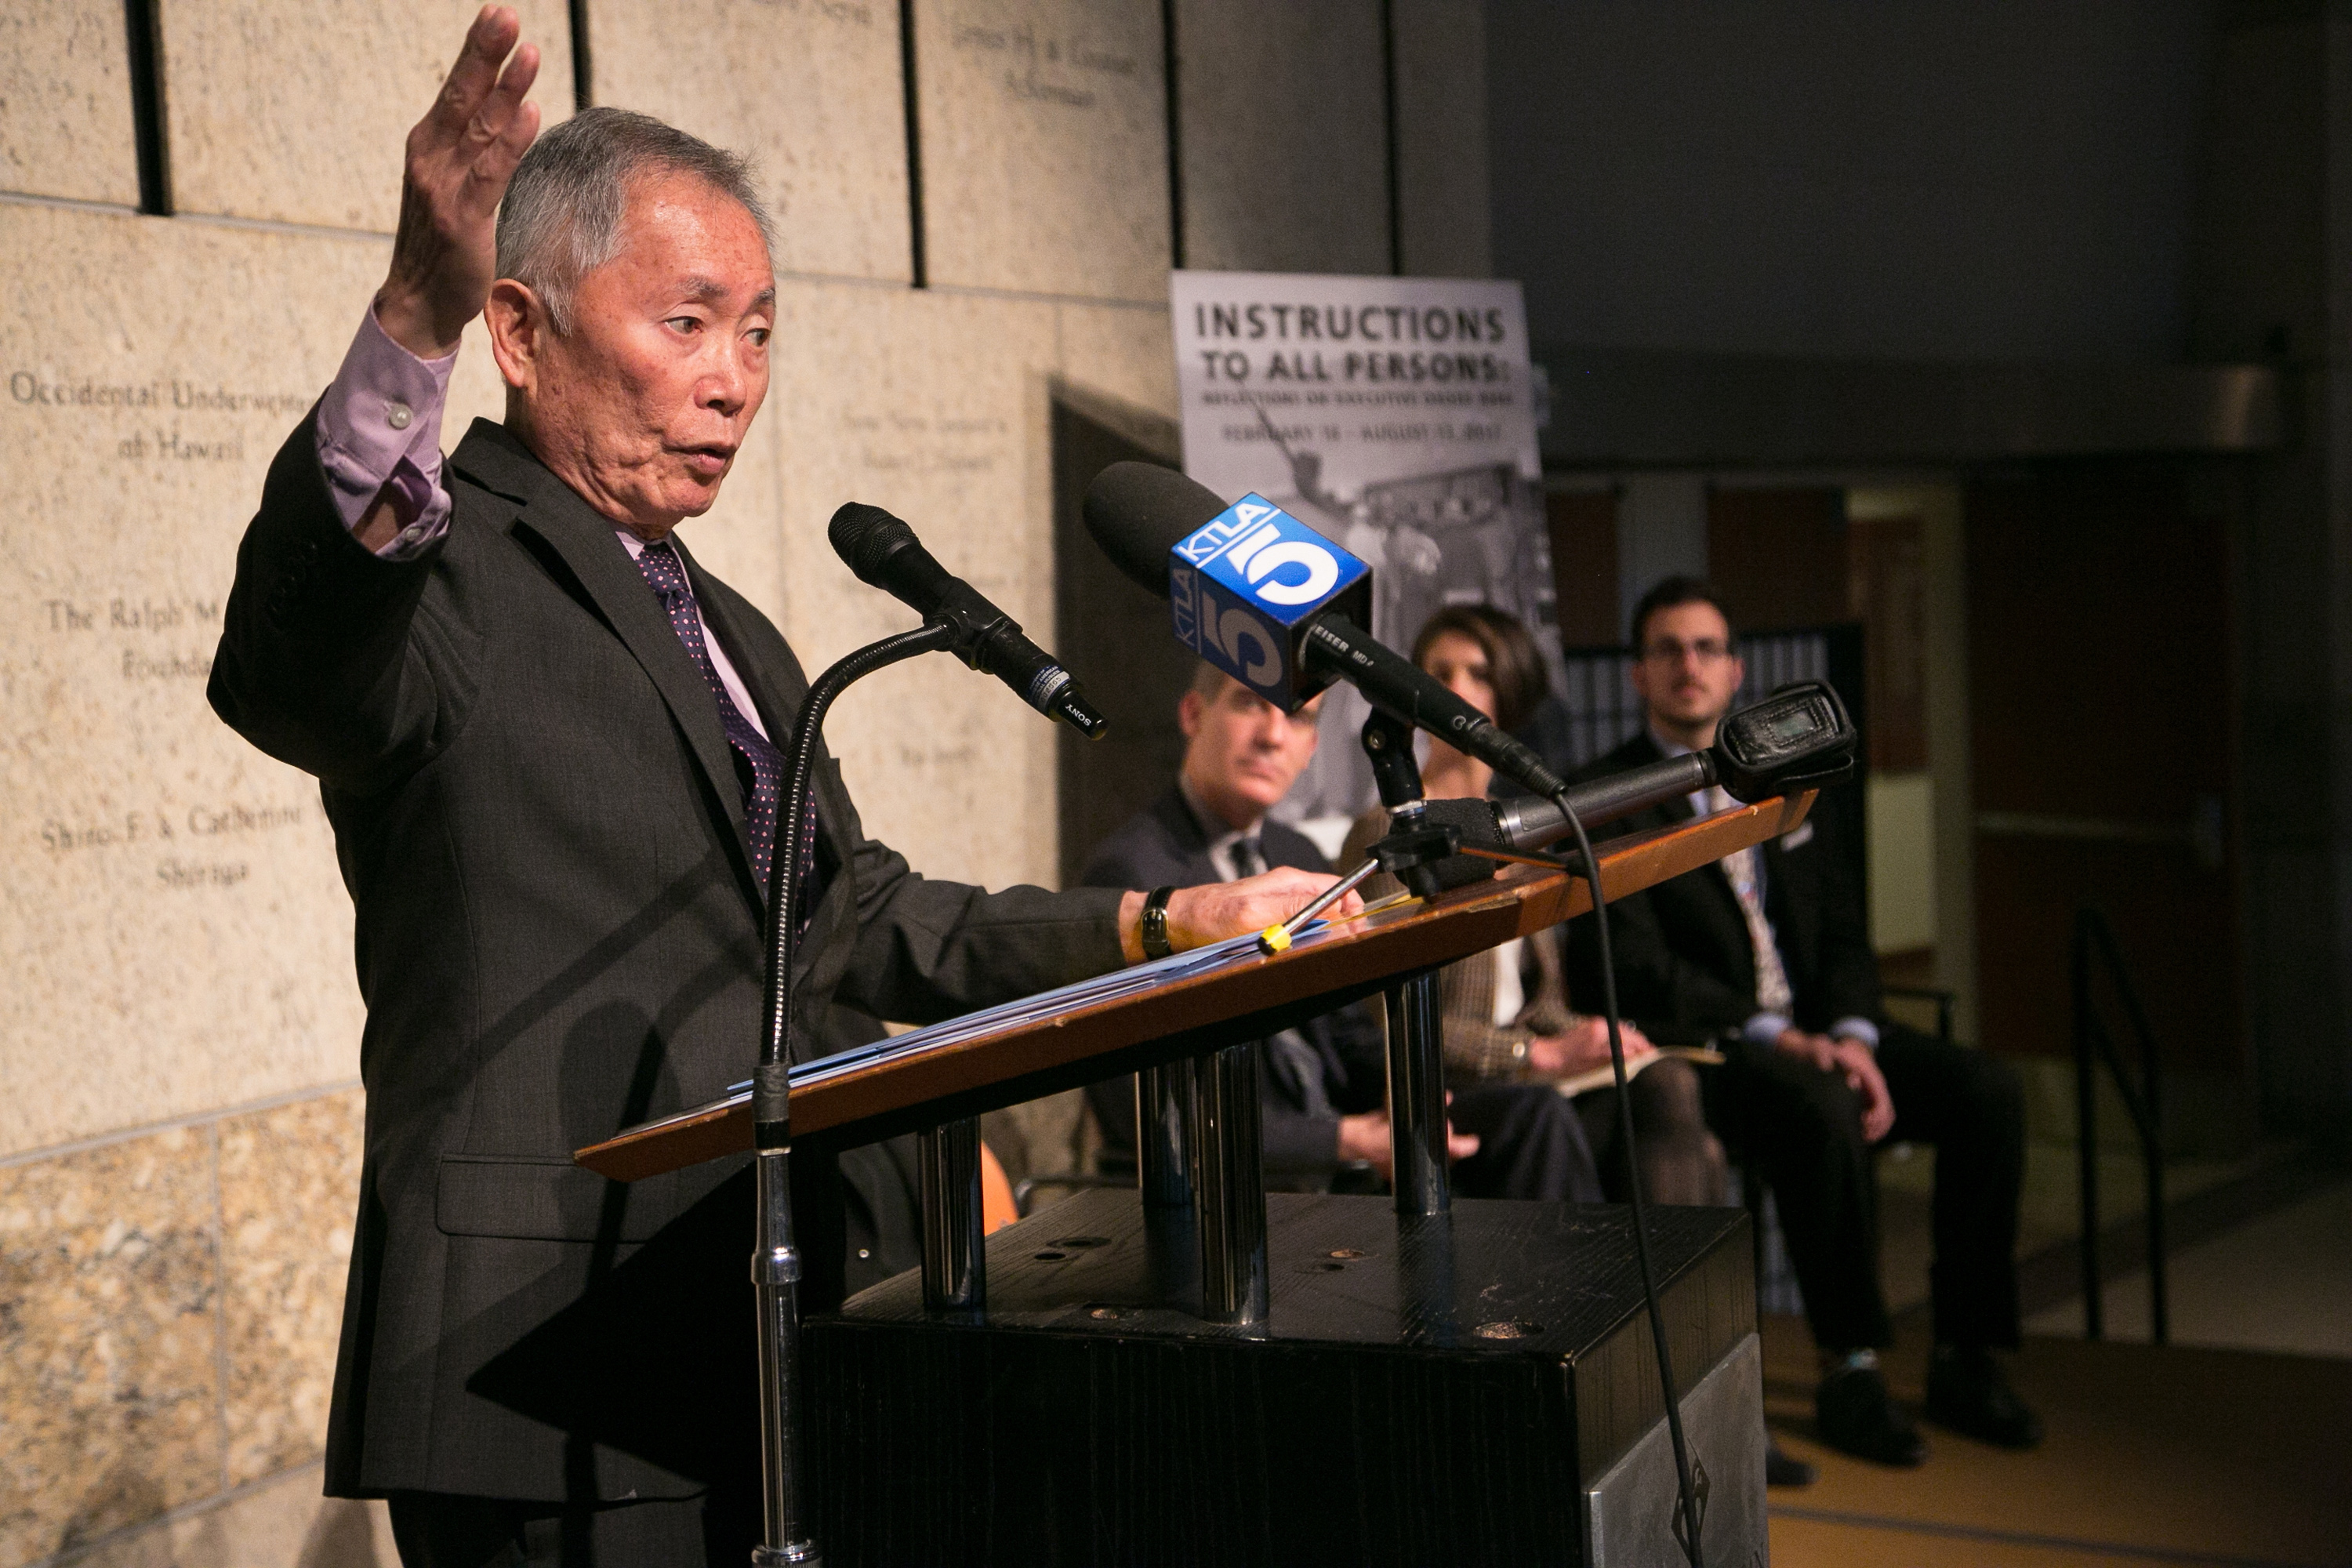 George Takei attends the press conference for The Japanese American National Museum's exhibition "Instructions To All Persons: Reflections On Executive Order 9066" at Japanese American National Museum on February 17, 2017, in Los Angeles, California. (Gabriel Olsen—Getty Images)